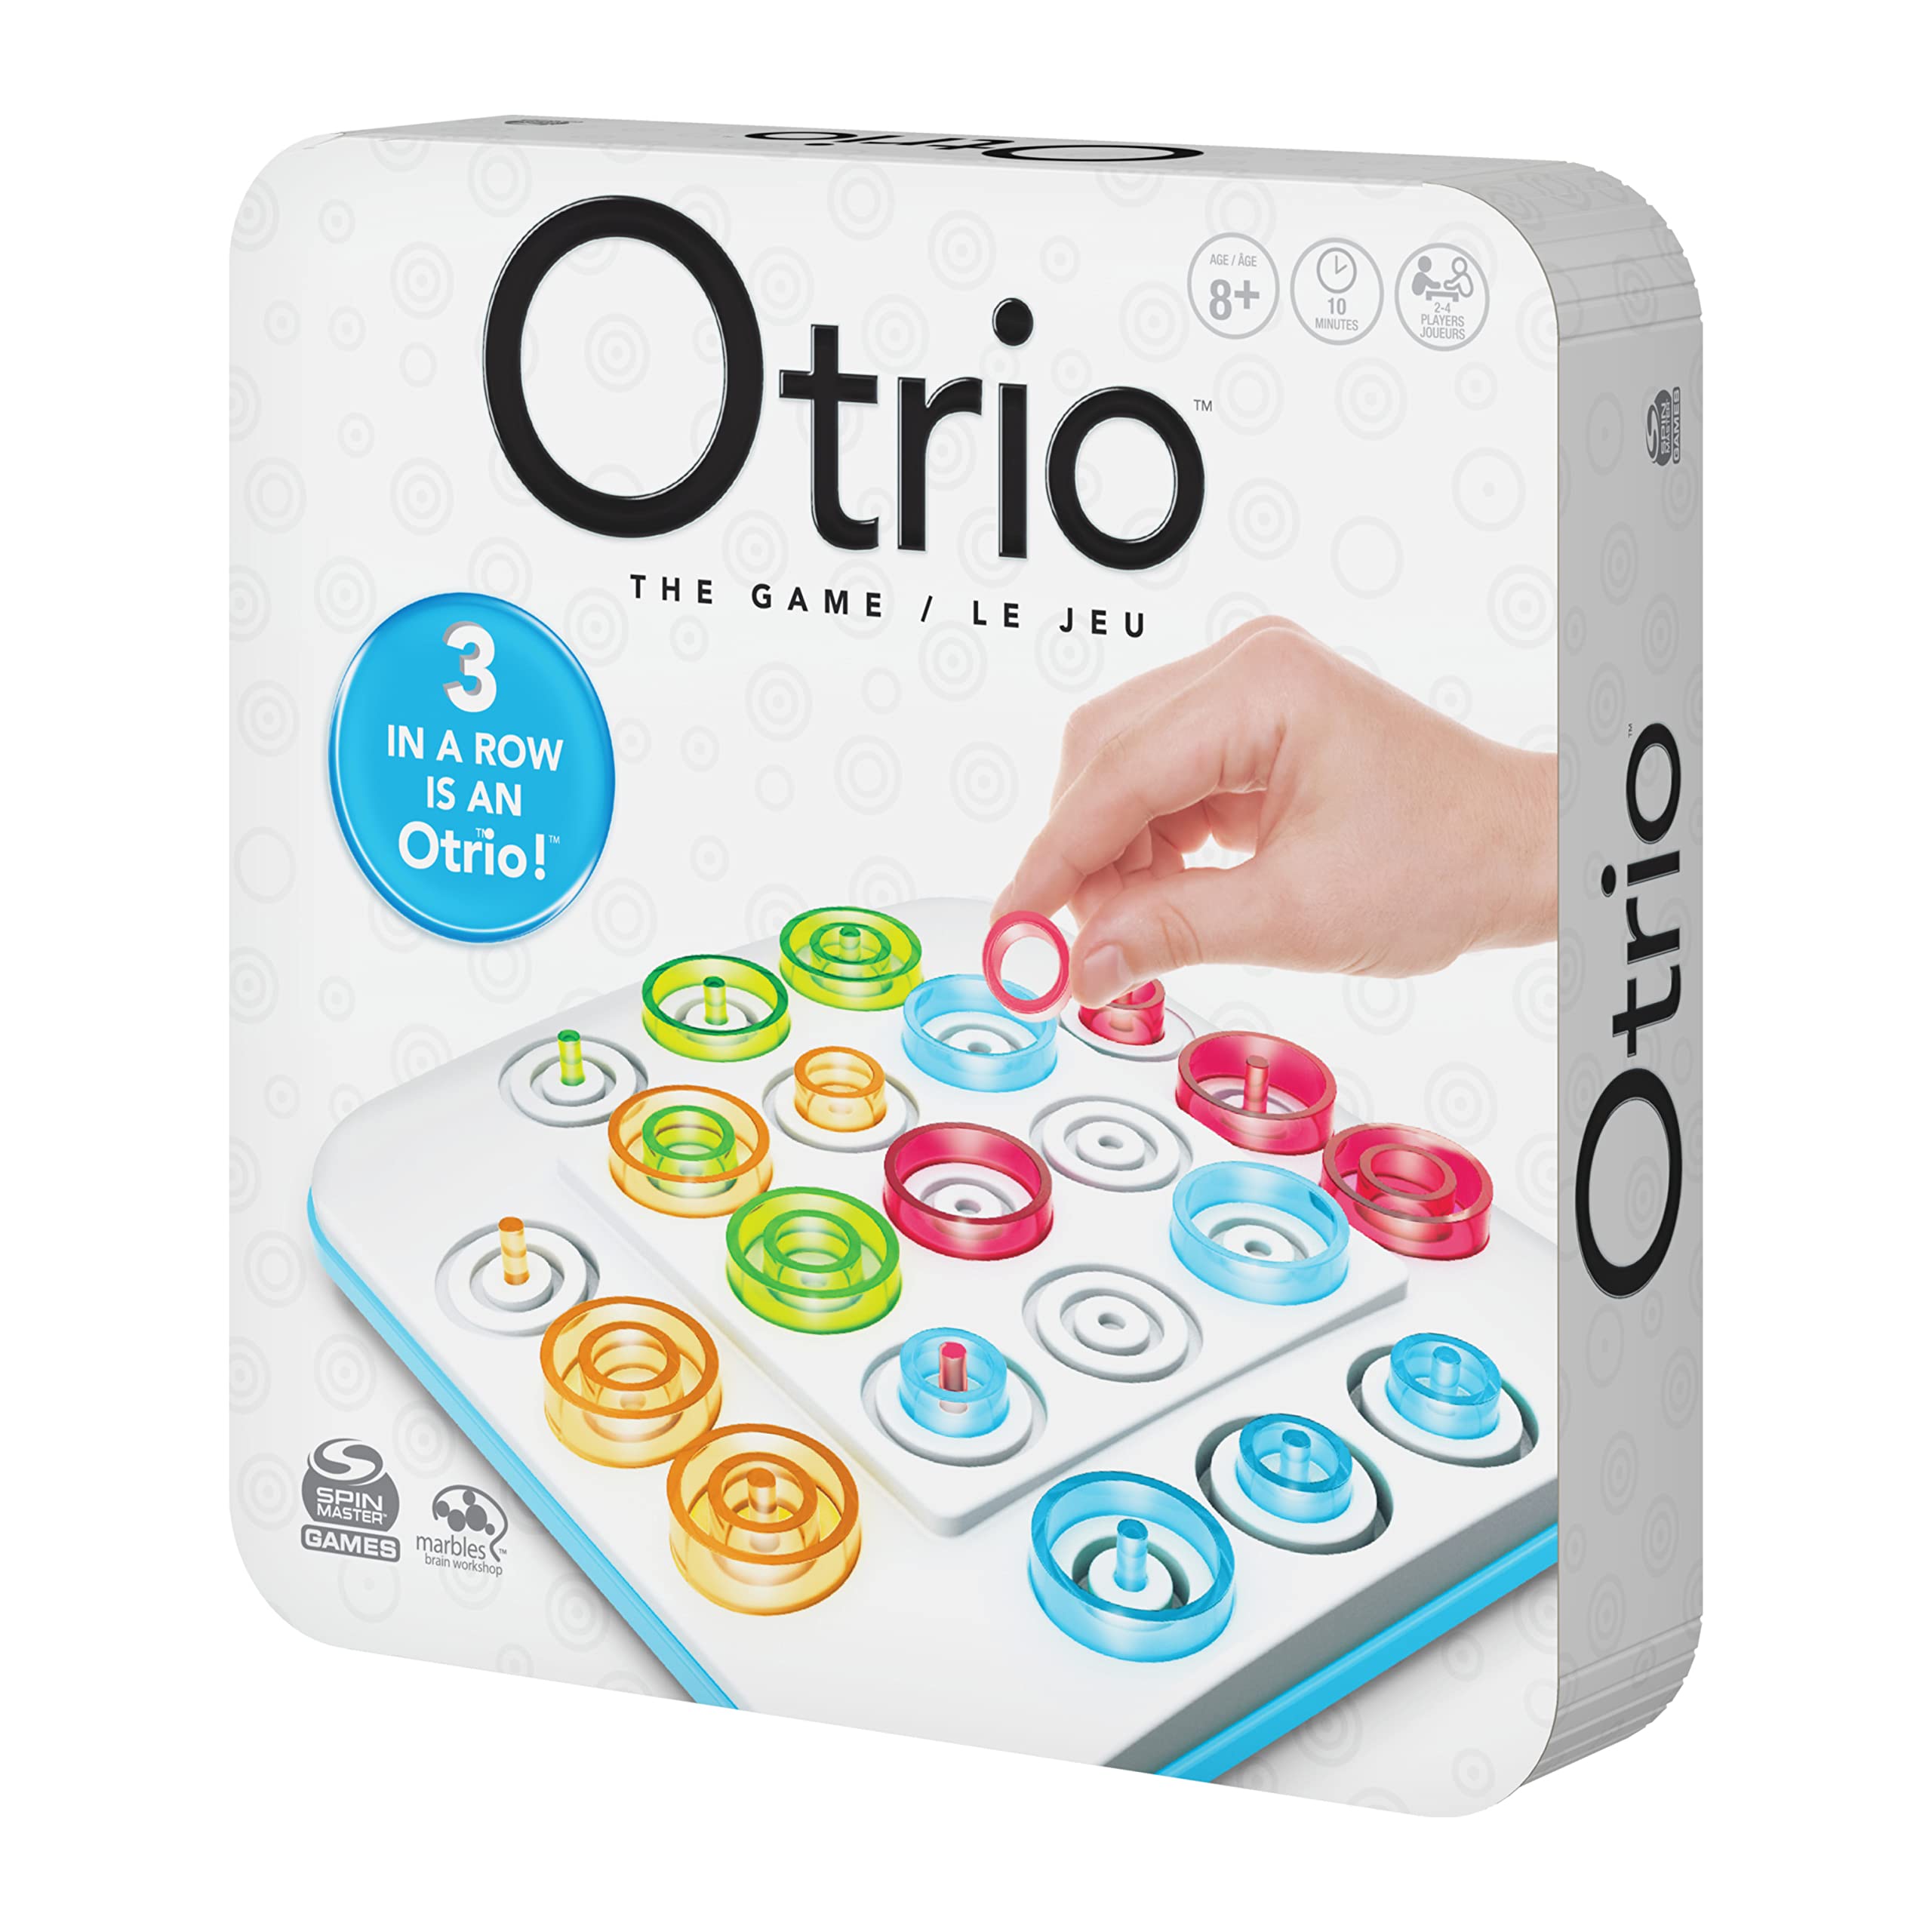 Otrio Strategy-Based Board Game, for Adults, Families, and Kids Ages 8 and up, by Marbles Brain Store